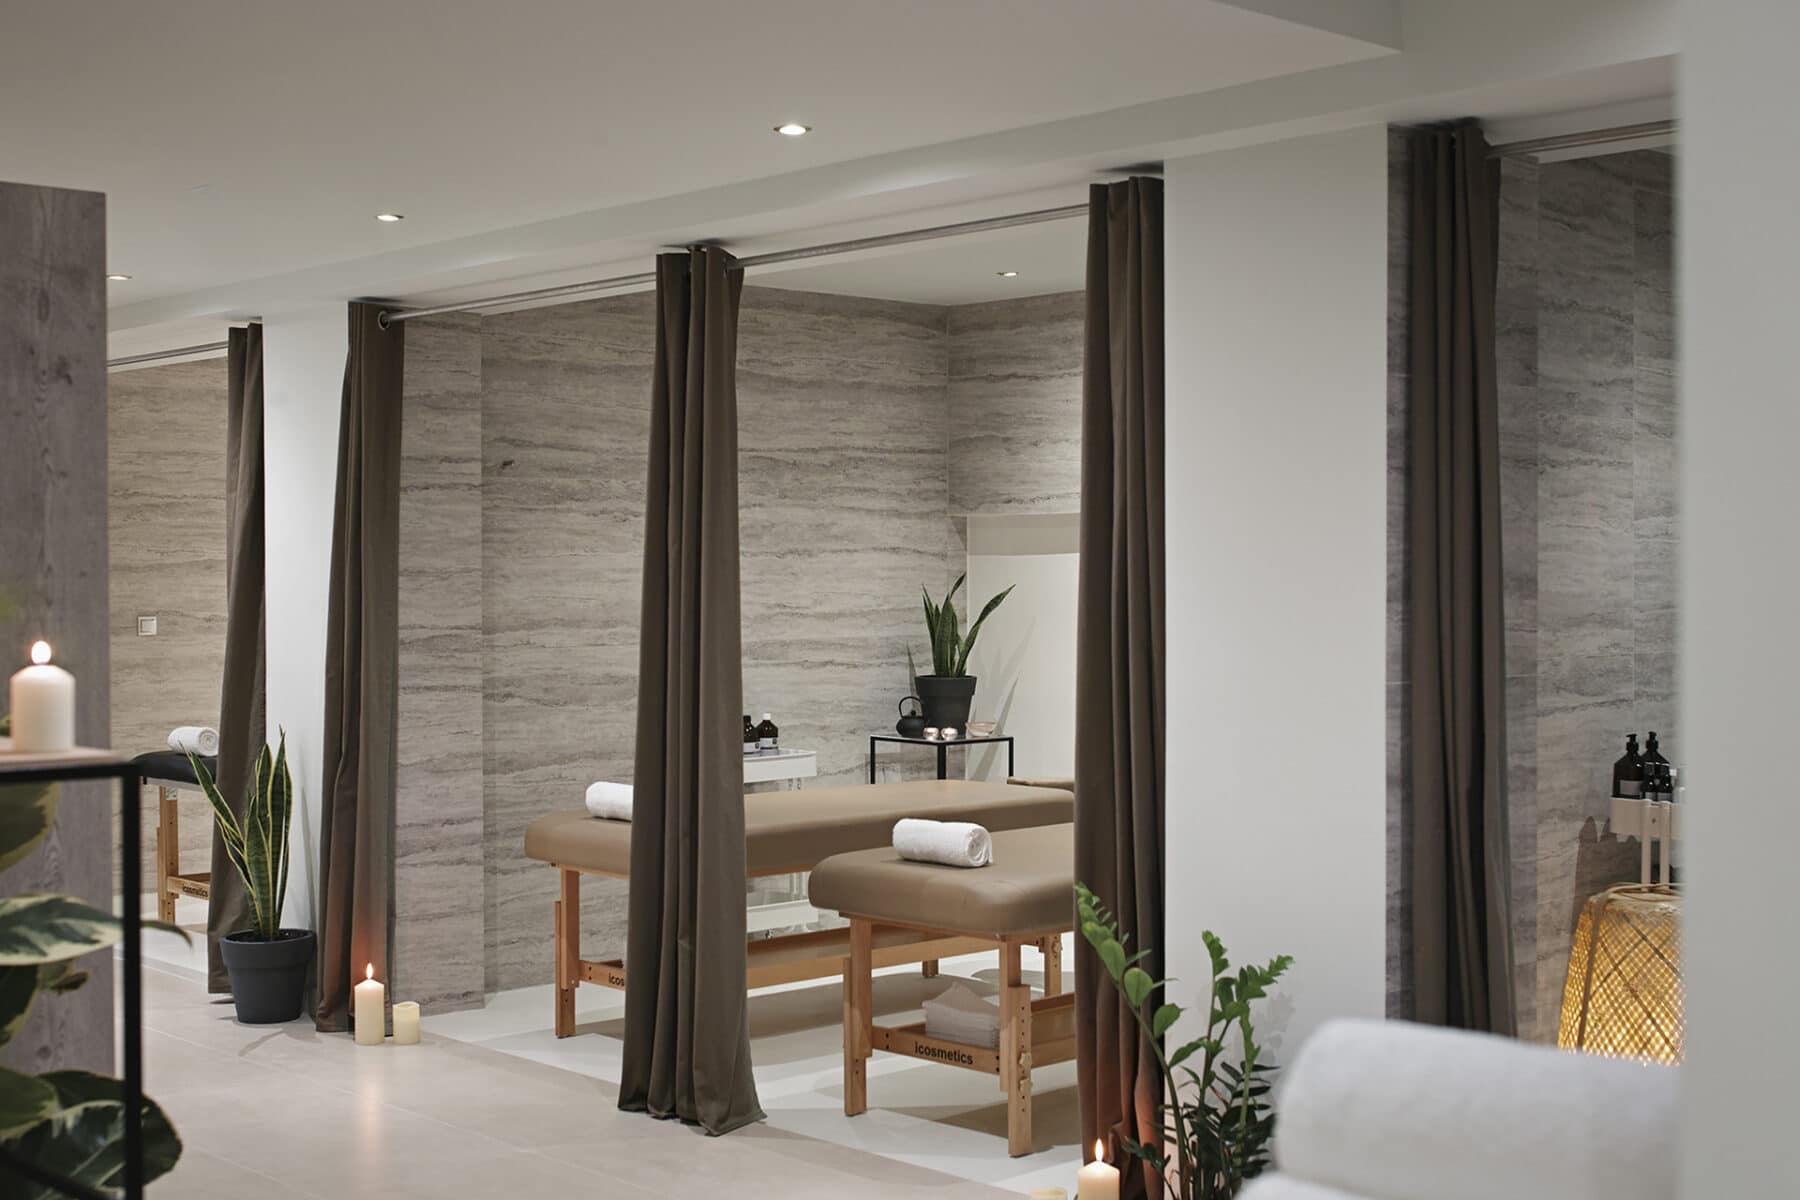 An exclusive Spa in the heart of Athens